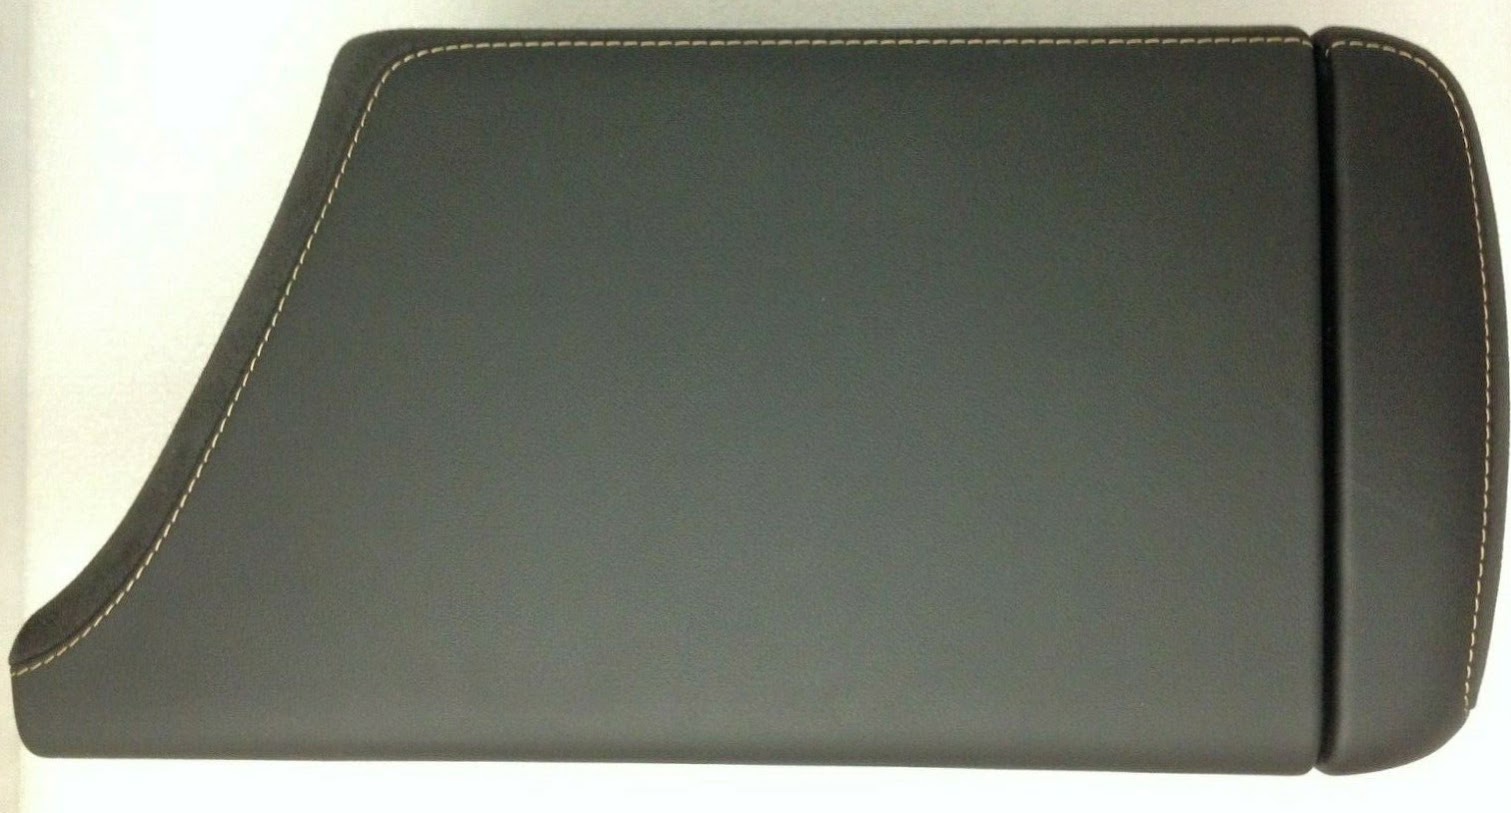 Cadillac CTS 2014+ center console lid leather Black Yellow NEW